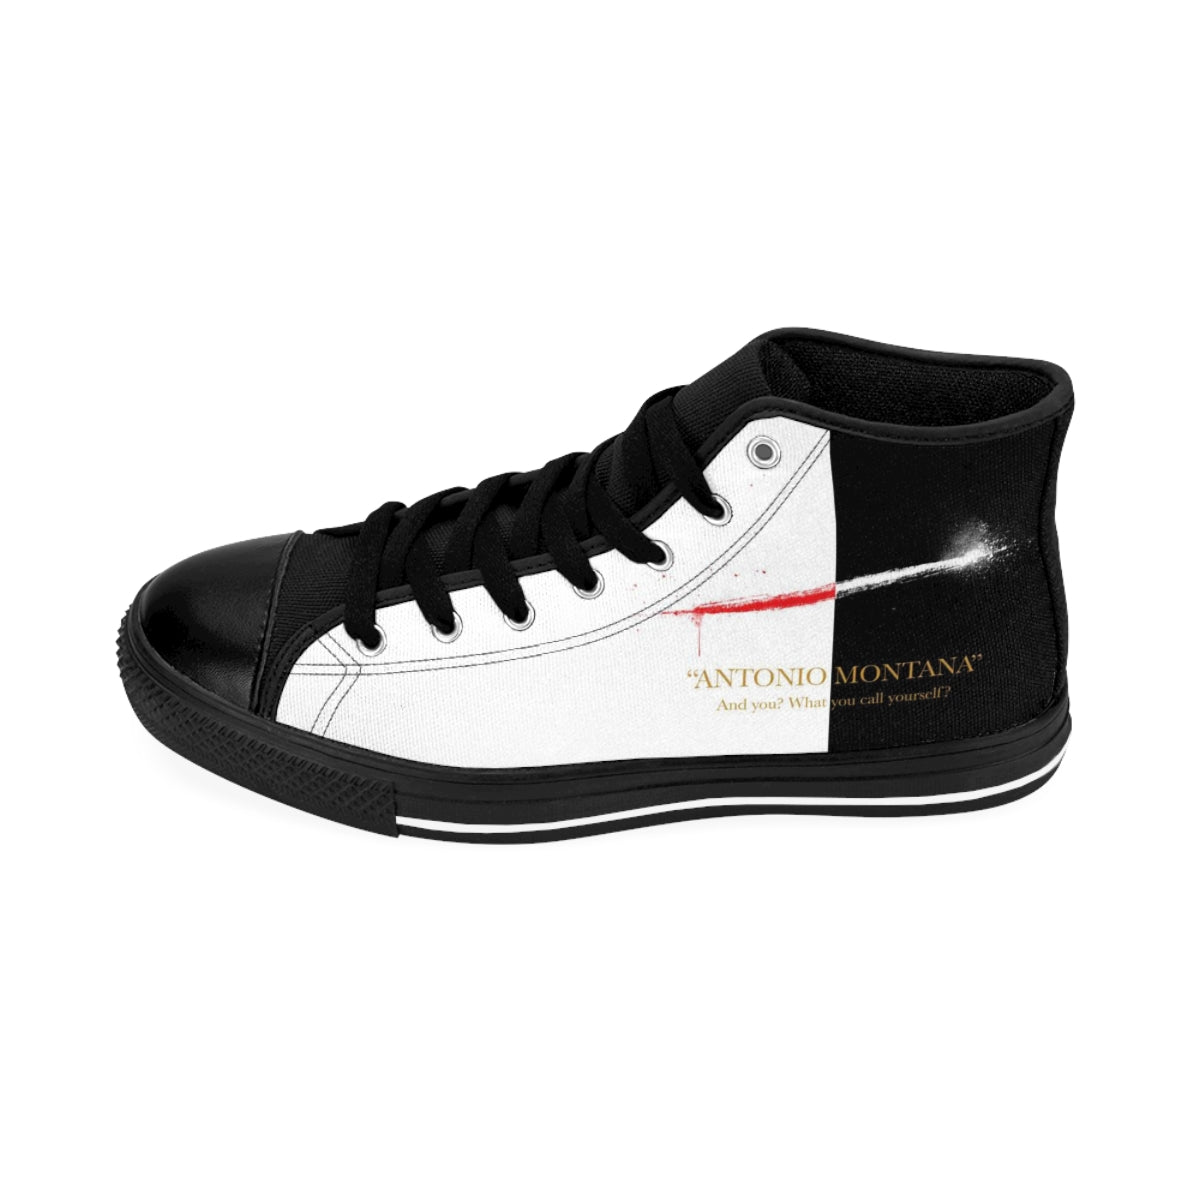 Tony Montana - Scarface High Top Canvas Sneakers